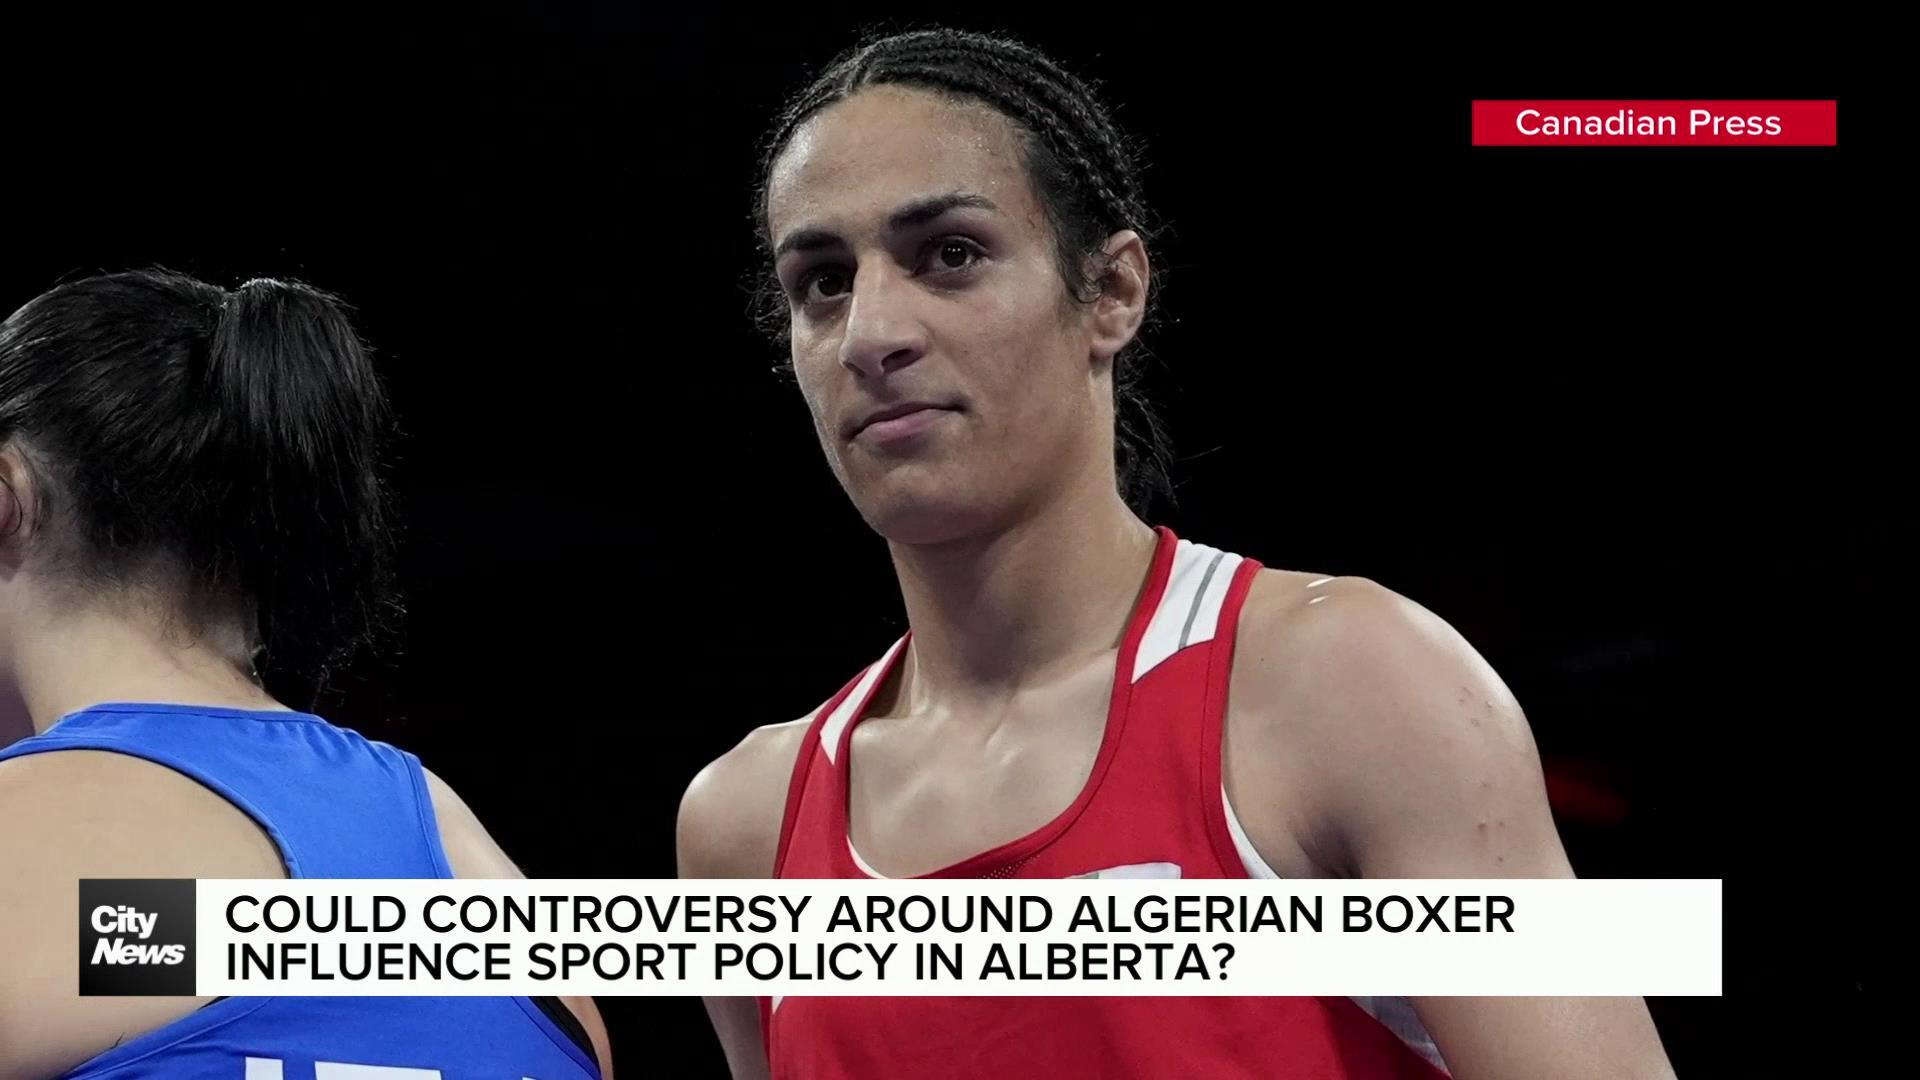 Could controversy around Algerian boxer influence sport policy in Alberta?